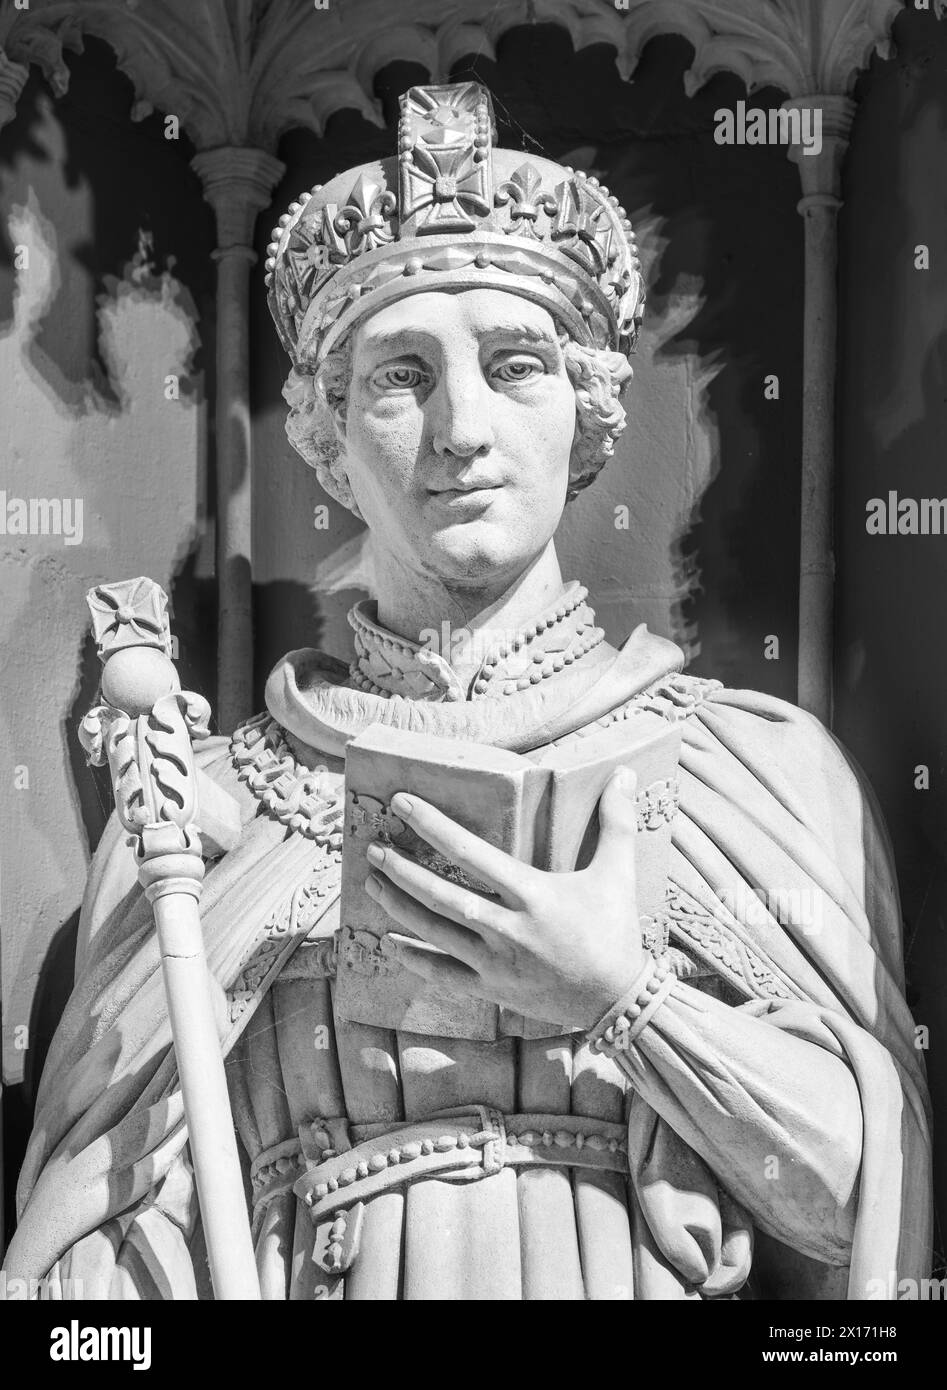 Statue of the murdered medieval english king Henry VI, on the rood screen in the minster (cathedral) at York, England. Stock Photo